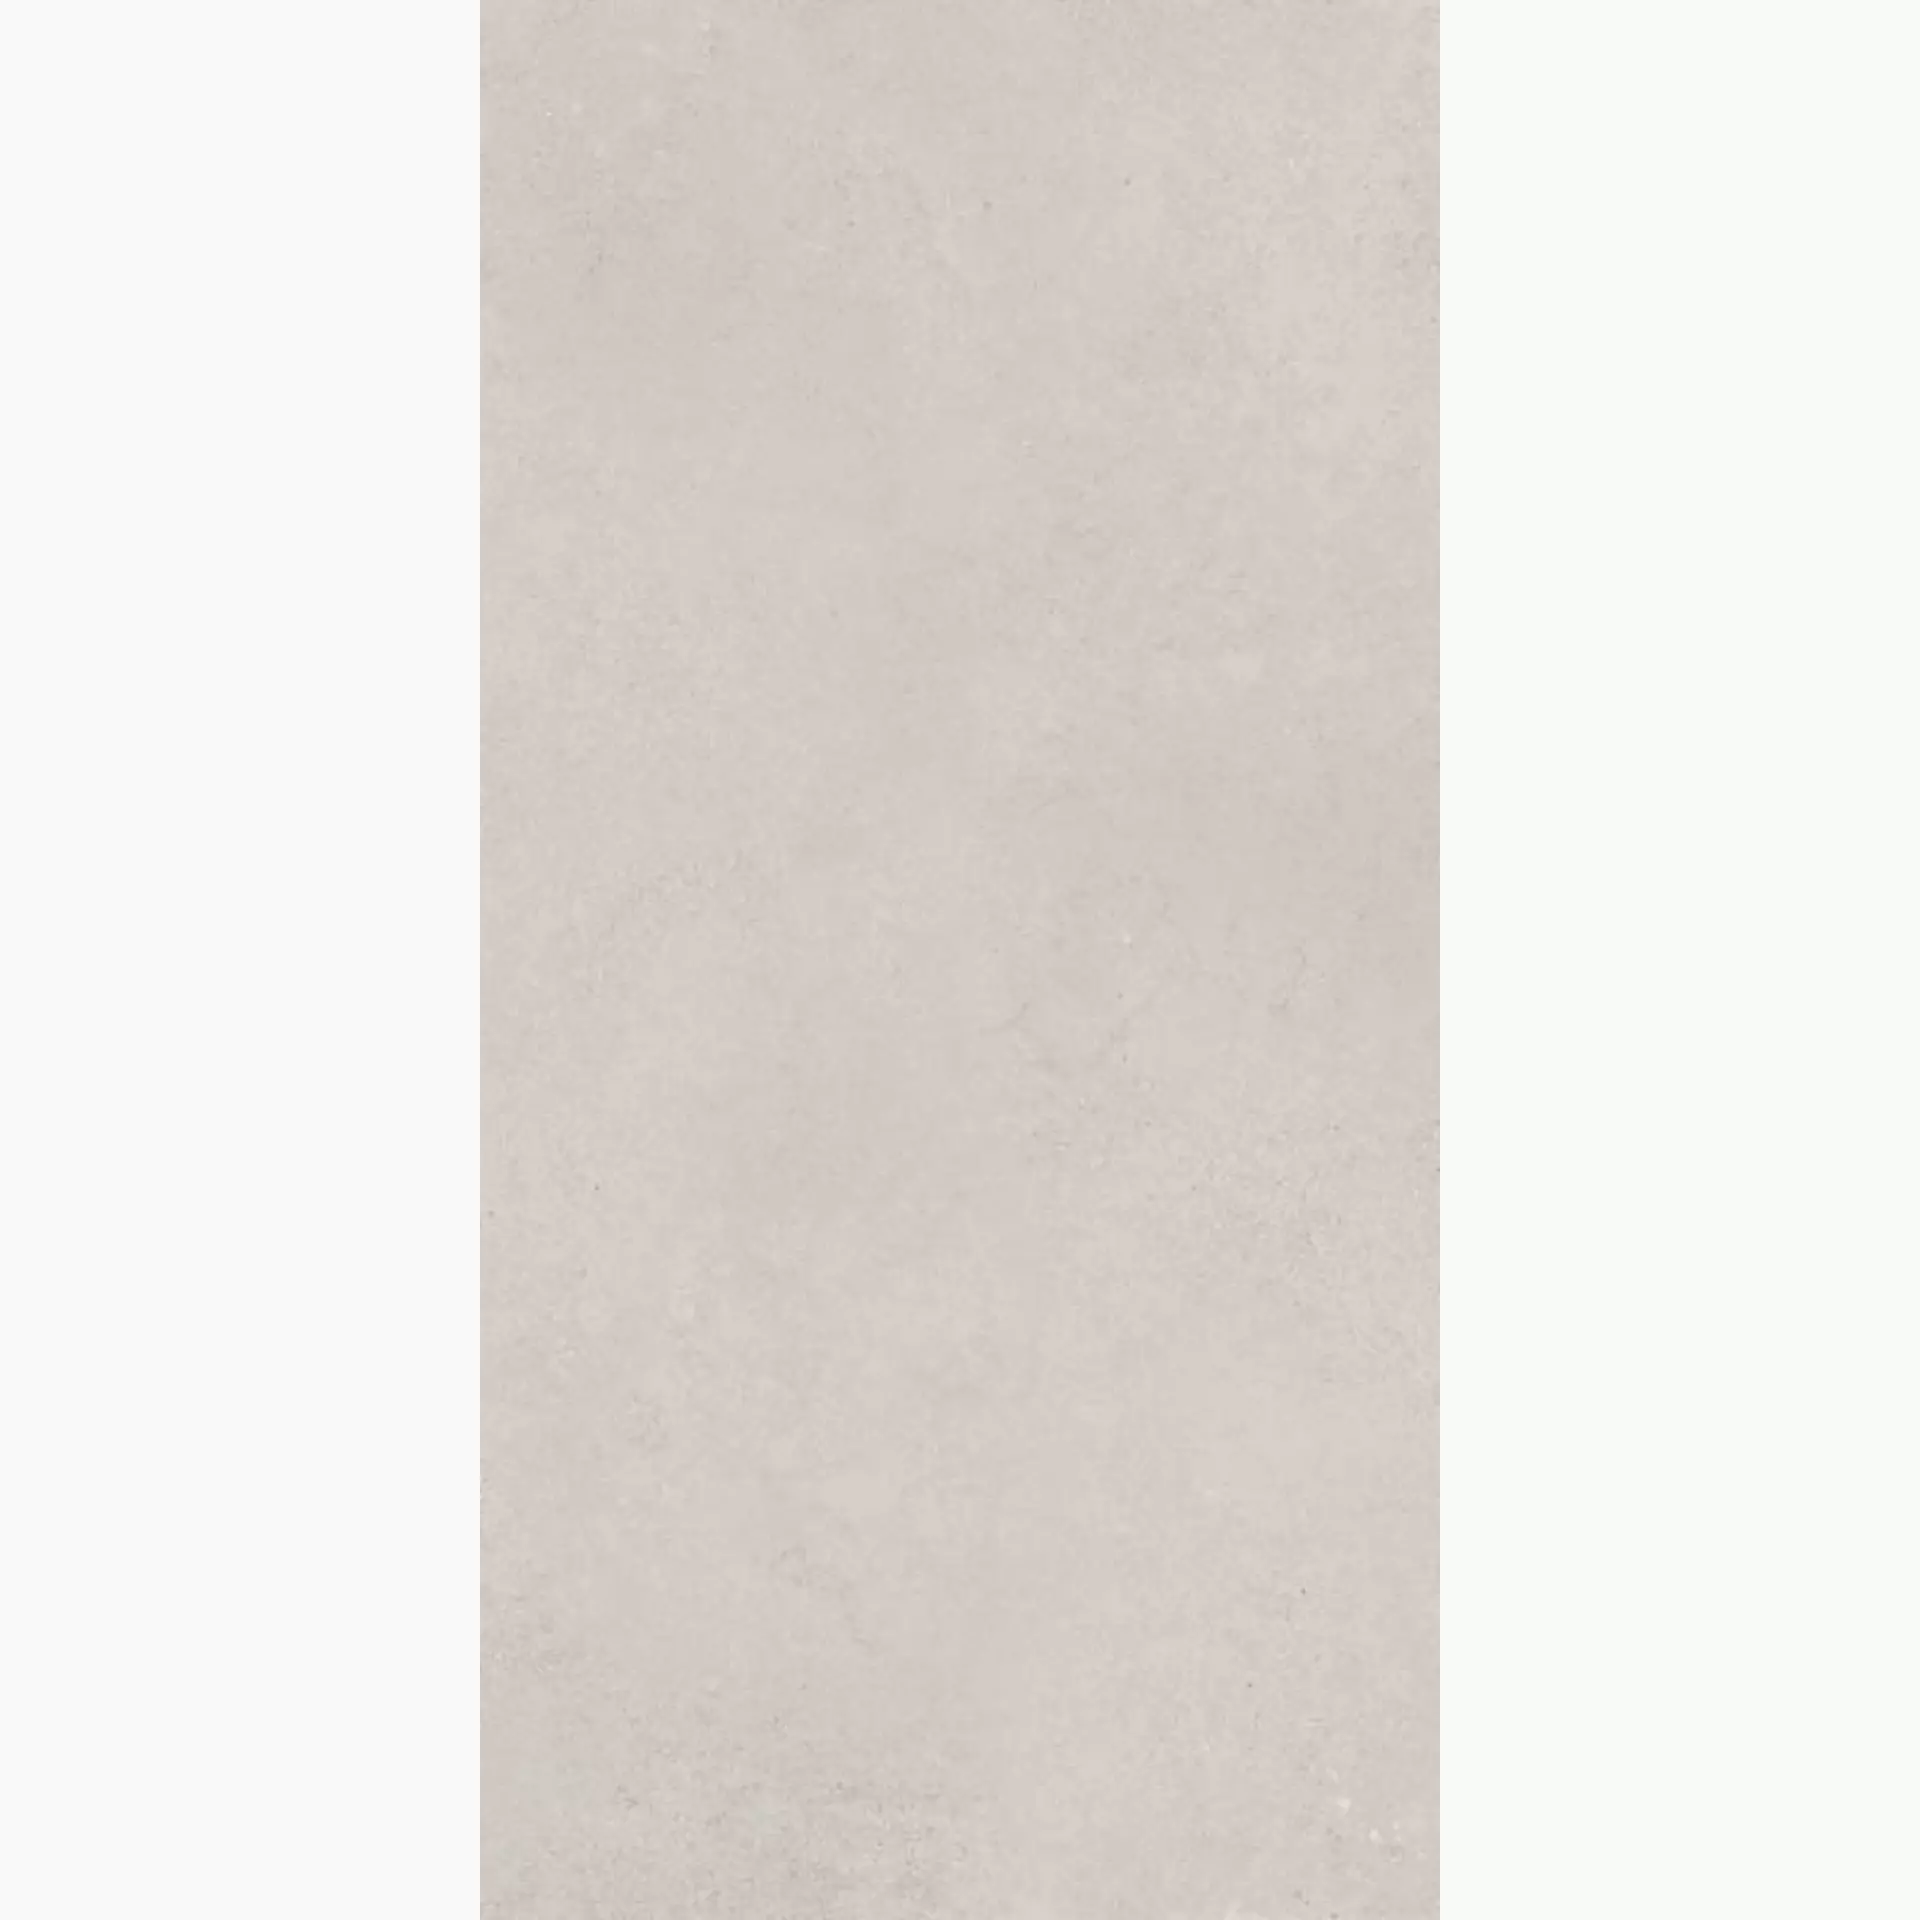 Sant Agostino Silkystone Greige Natural CSASKGR612 60x120cm rectified 10mm